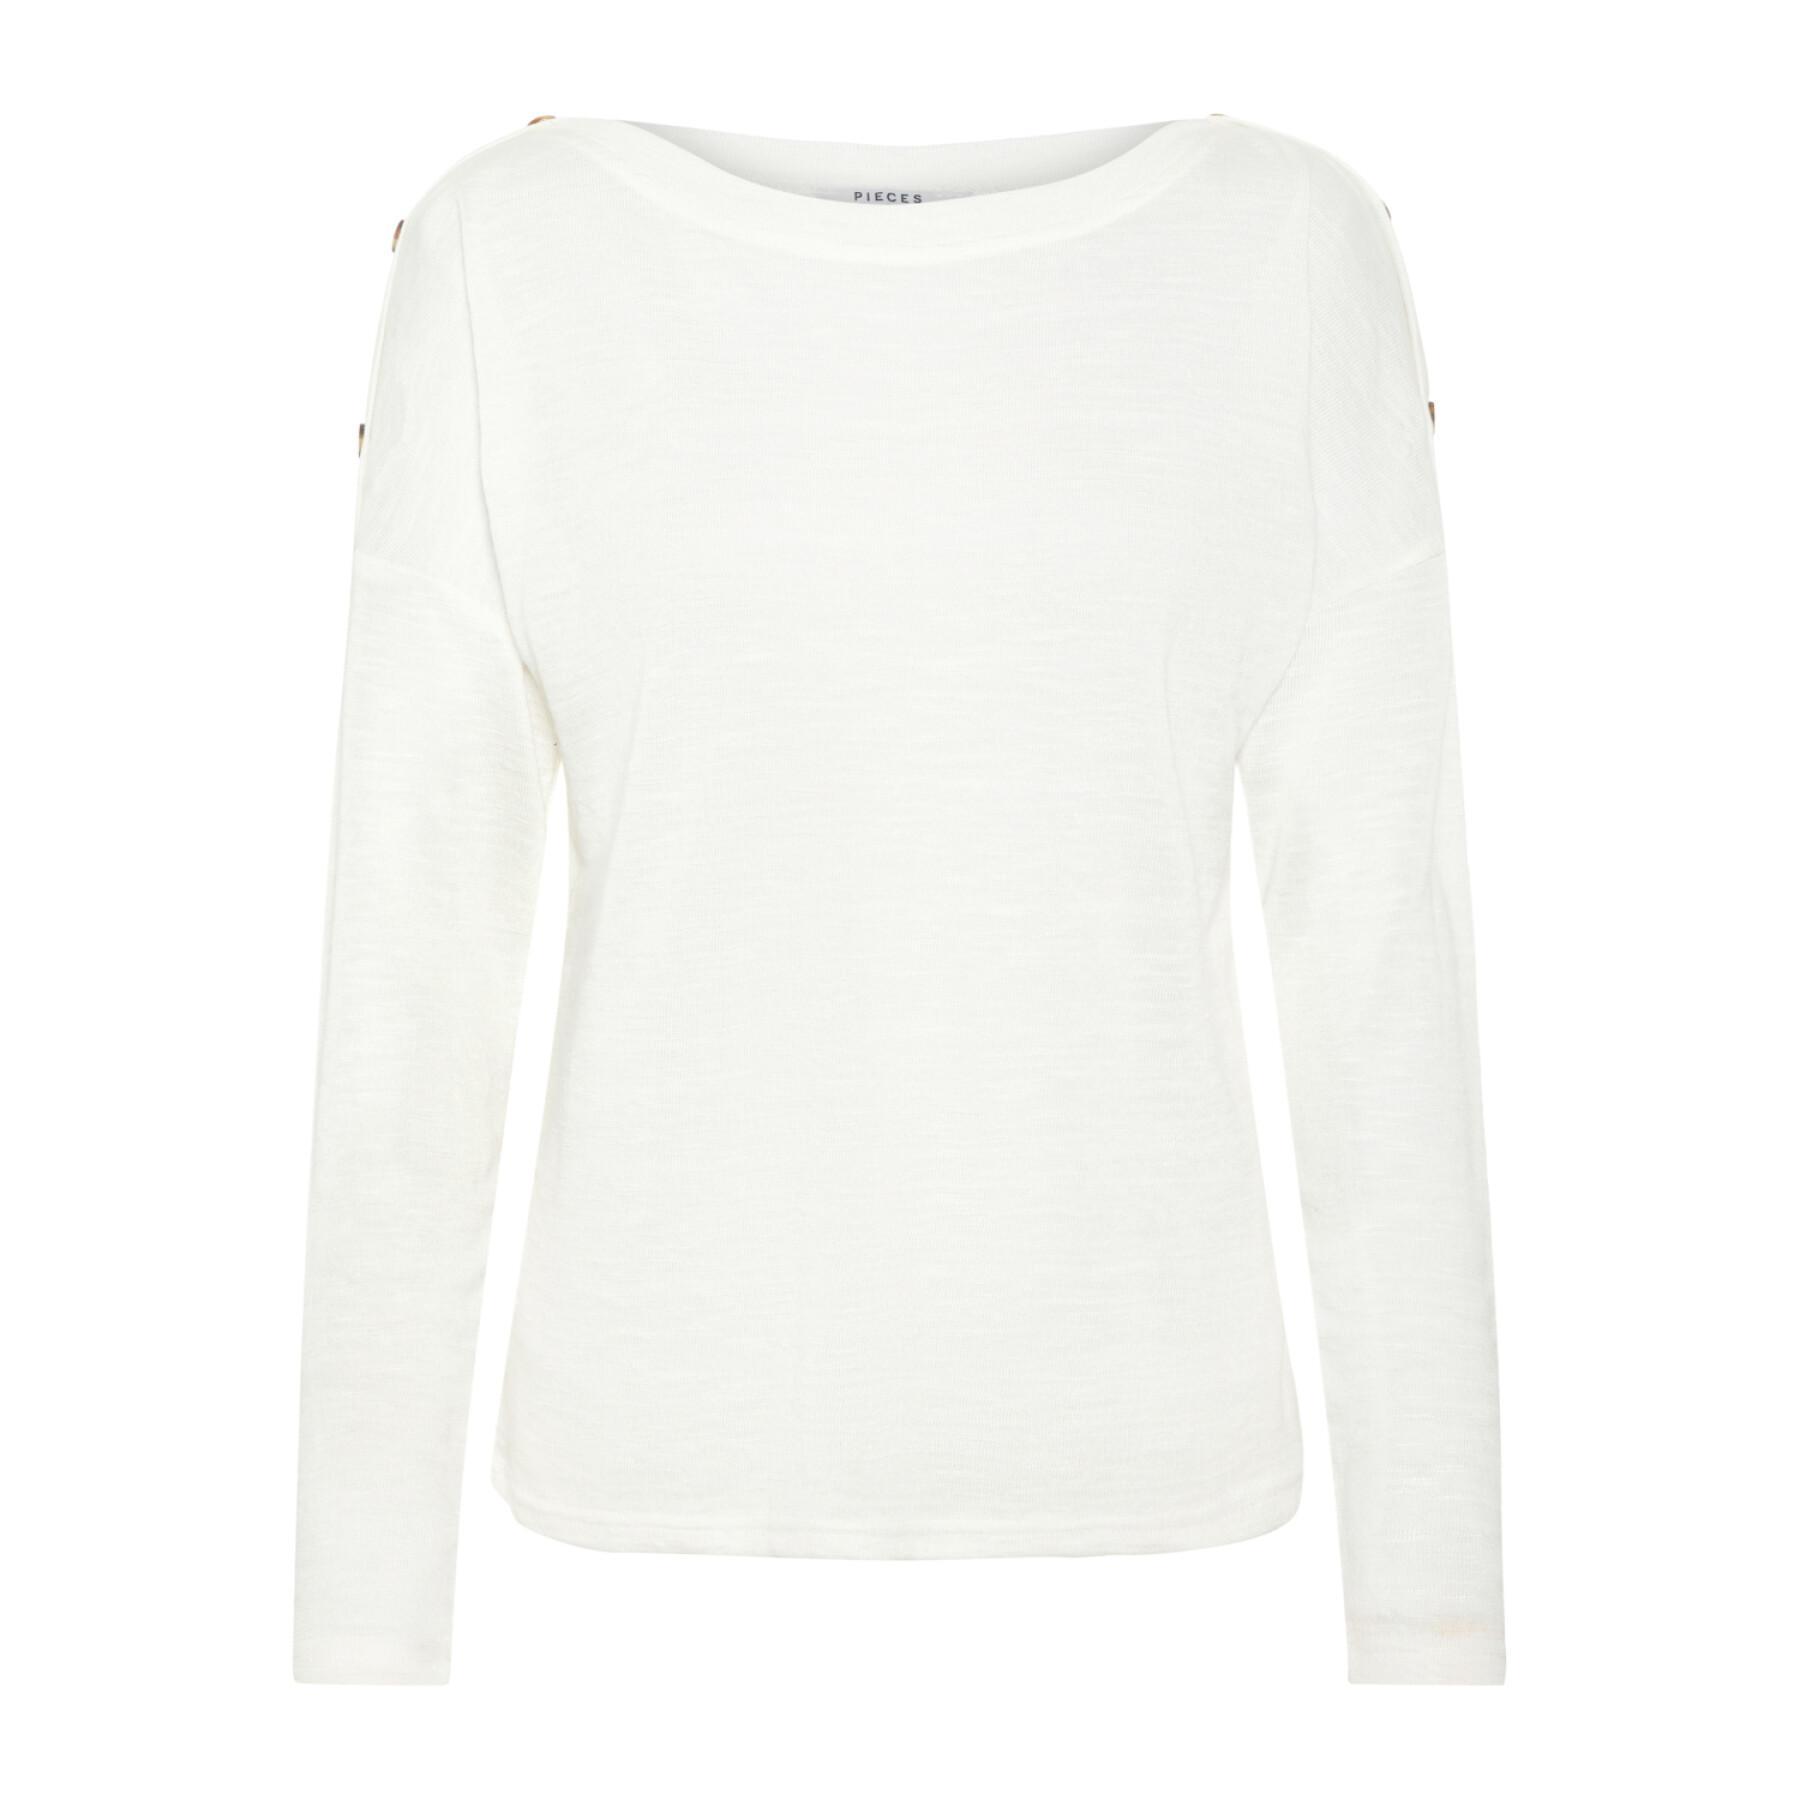 Women's long-sleeved t-shirt with o-neck Pieces Nollie